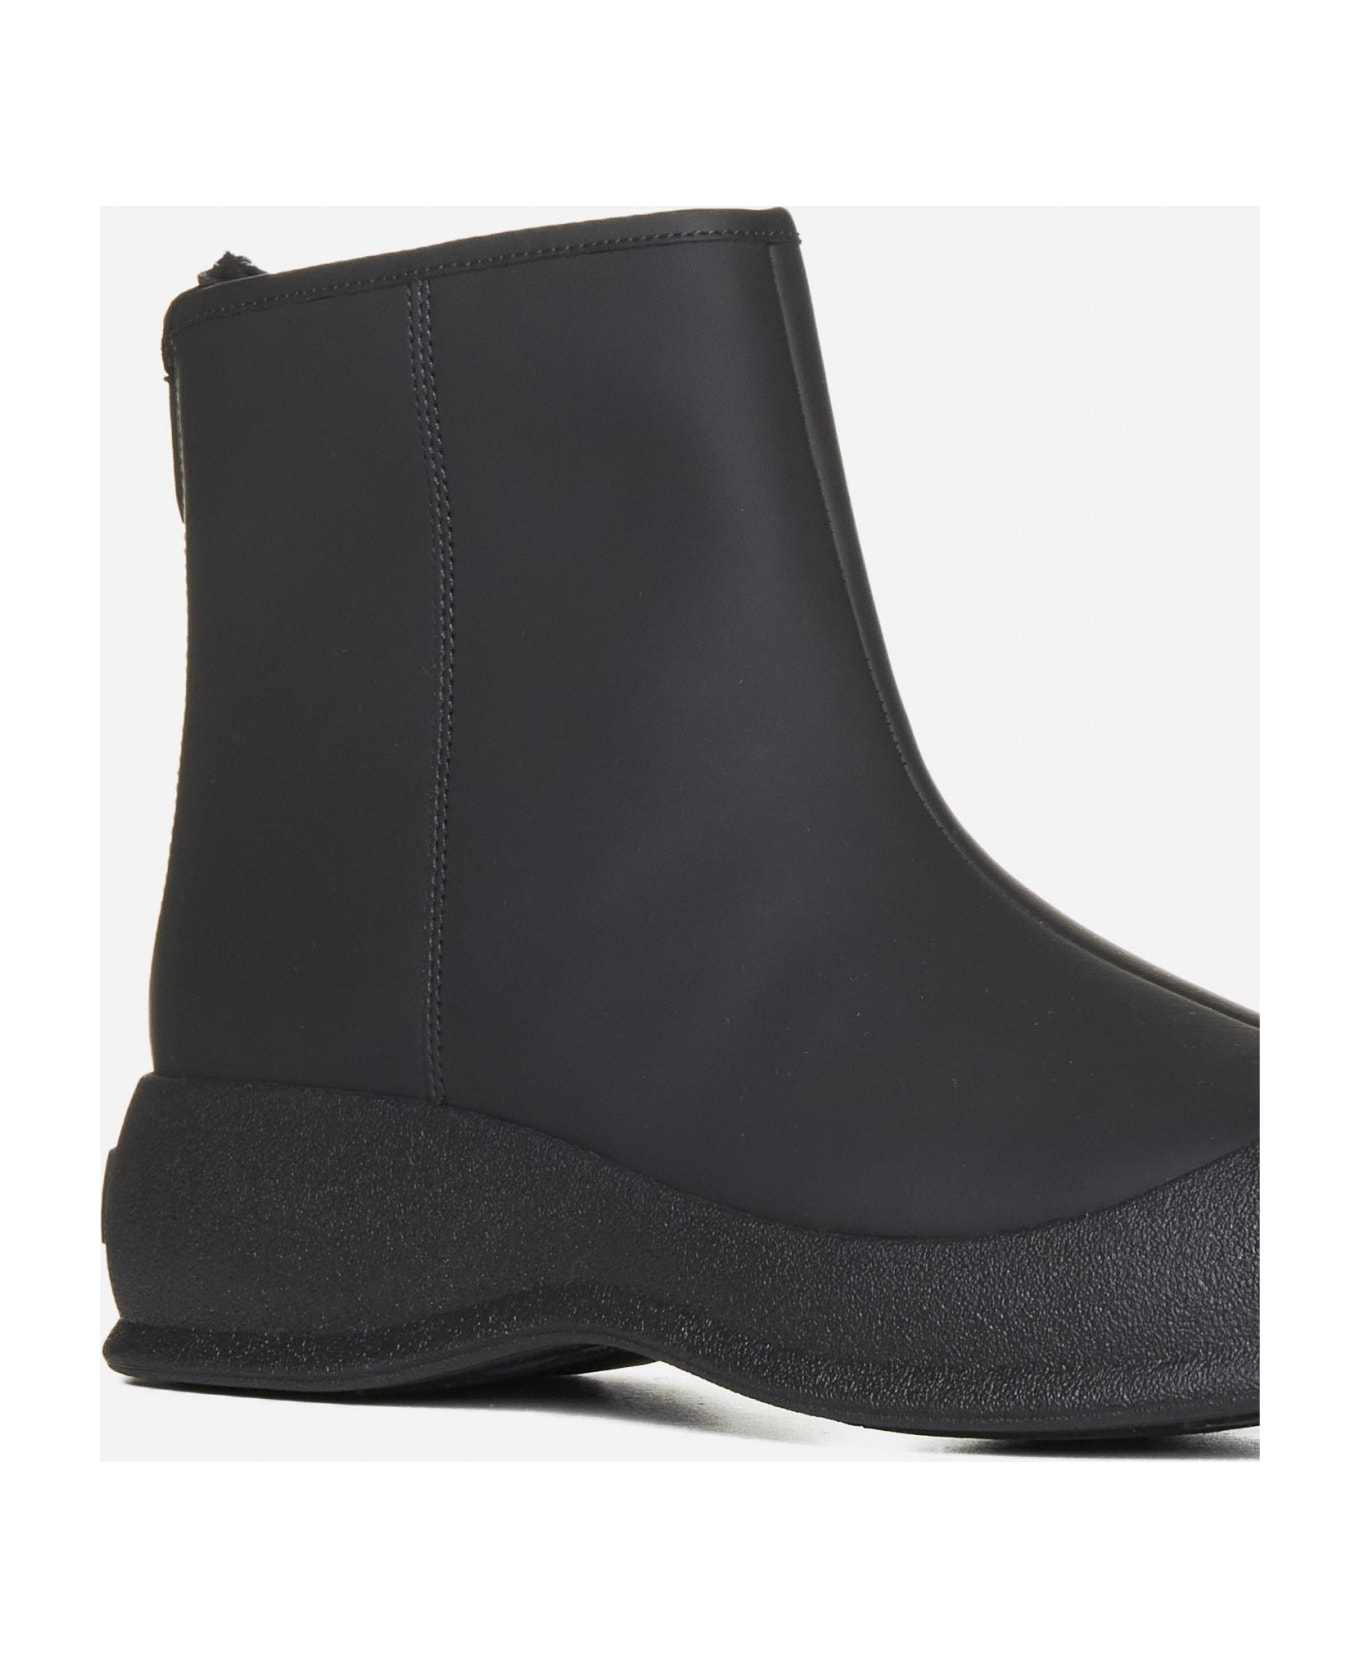 Bally Carsey Coated Leather Ankle Boots - Black ブーツ